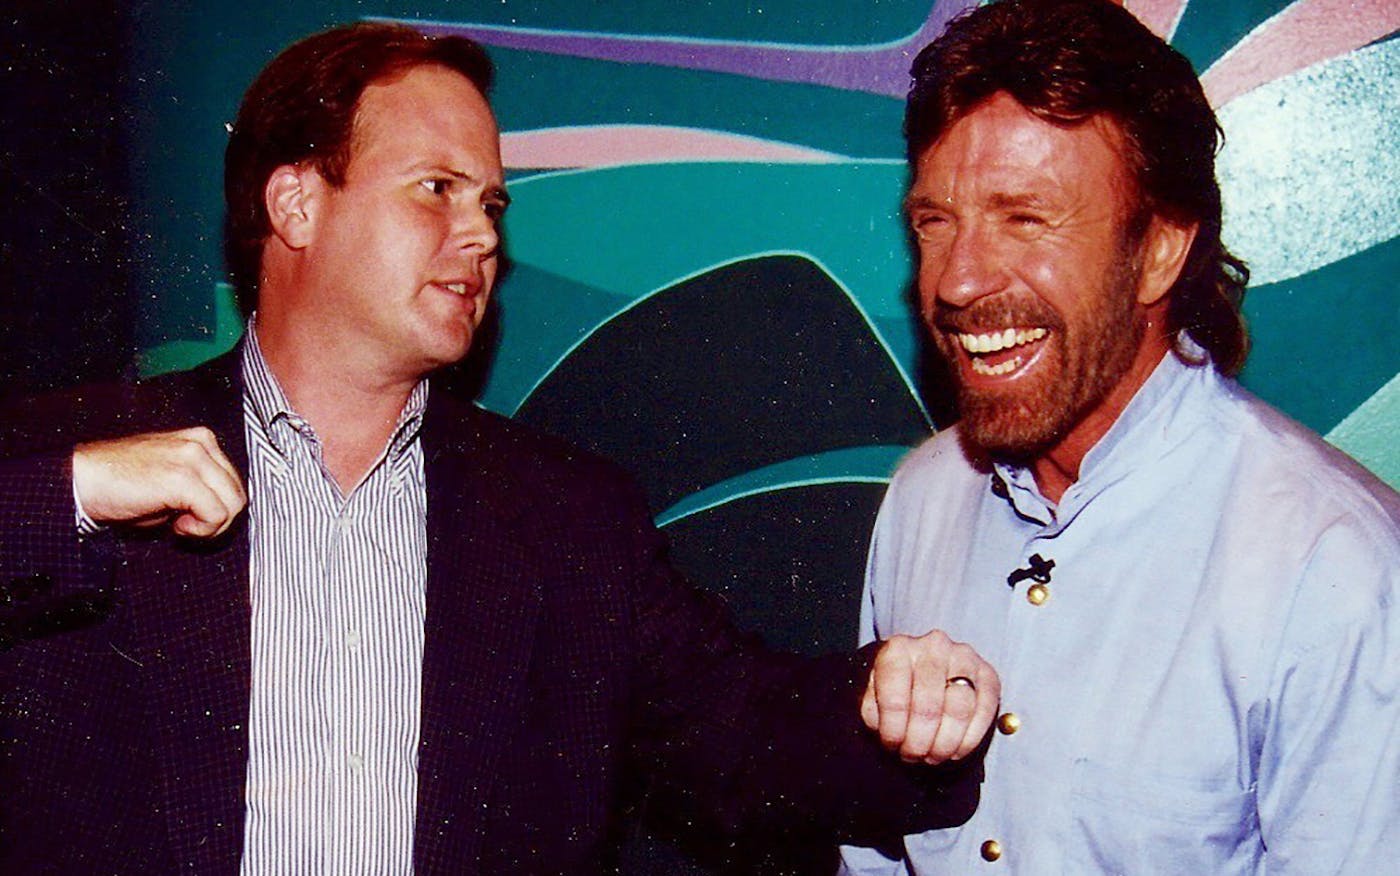 chuck norris thumbs up funny